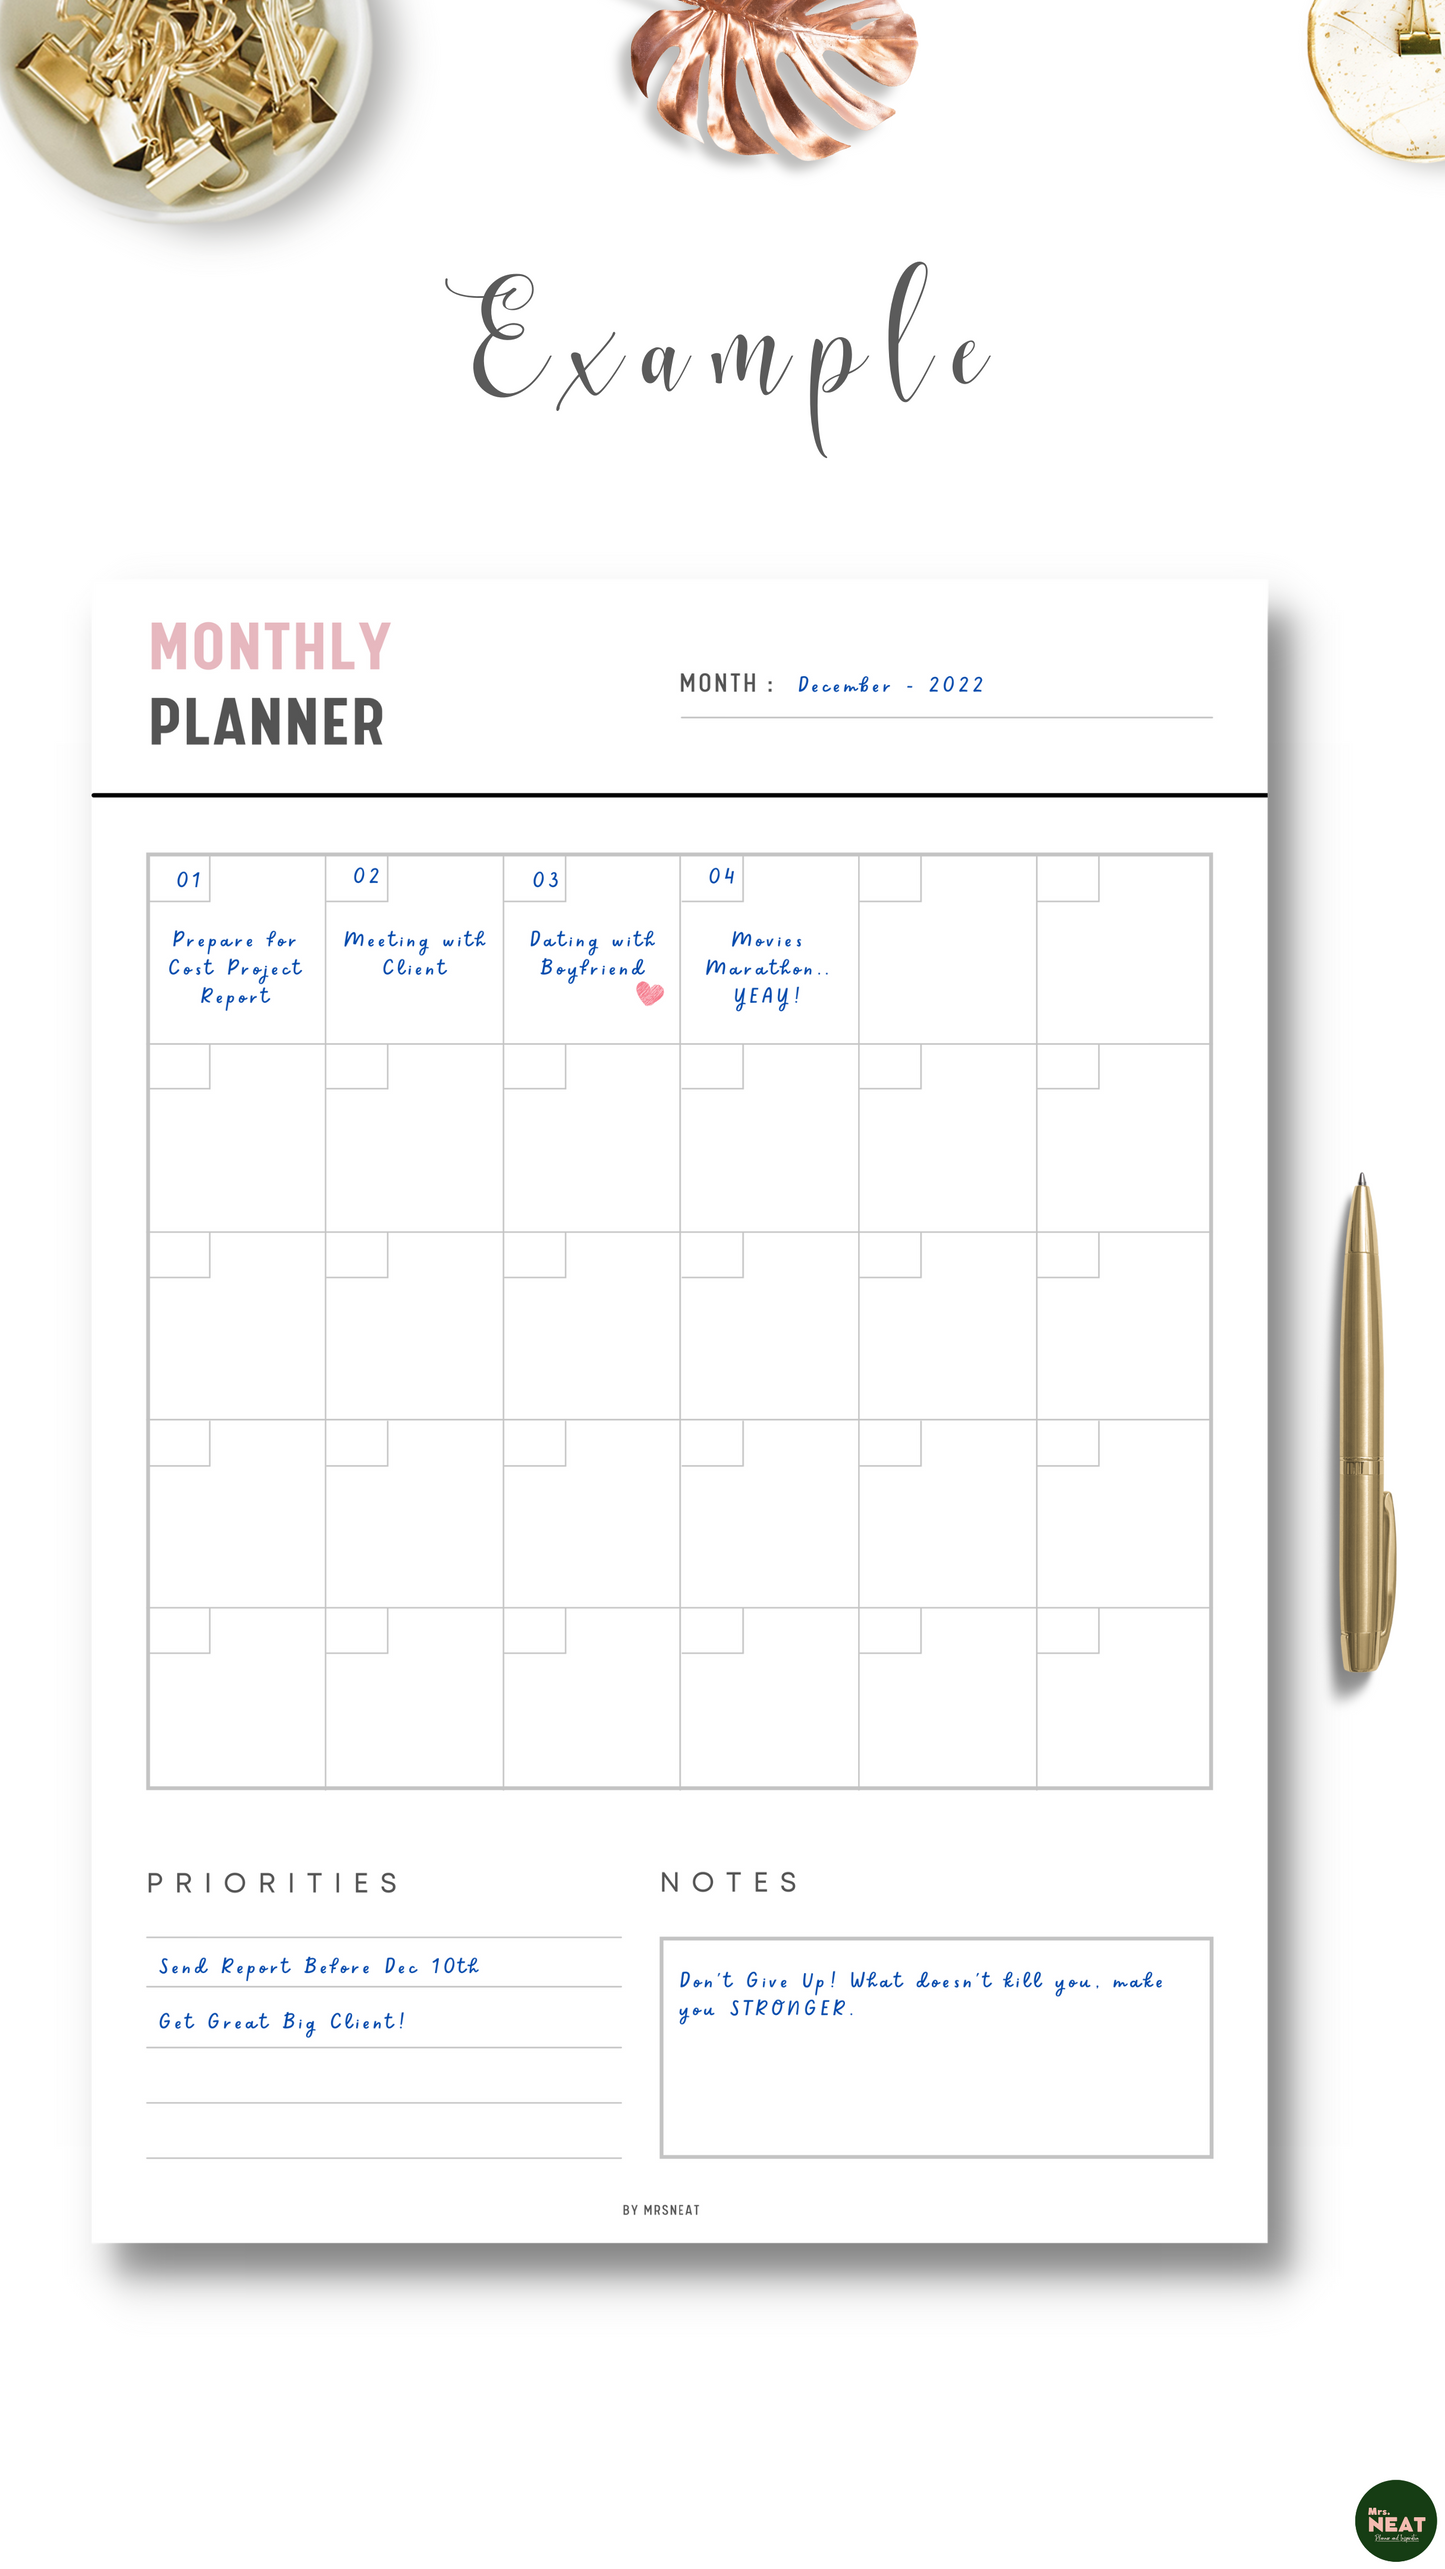 Clean and Minimalist Monthly Planner with list of schedule, priorities and notes as an example